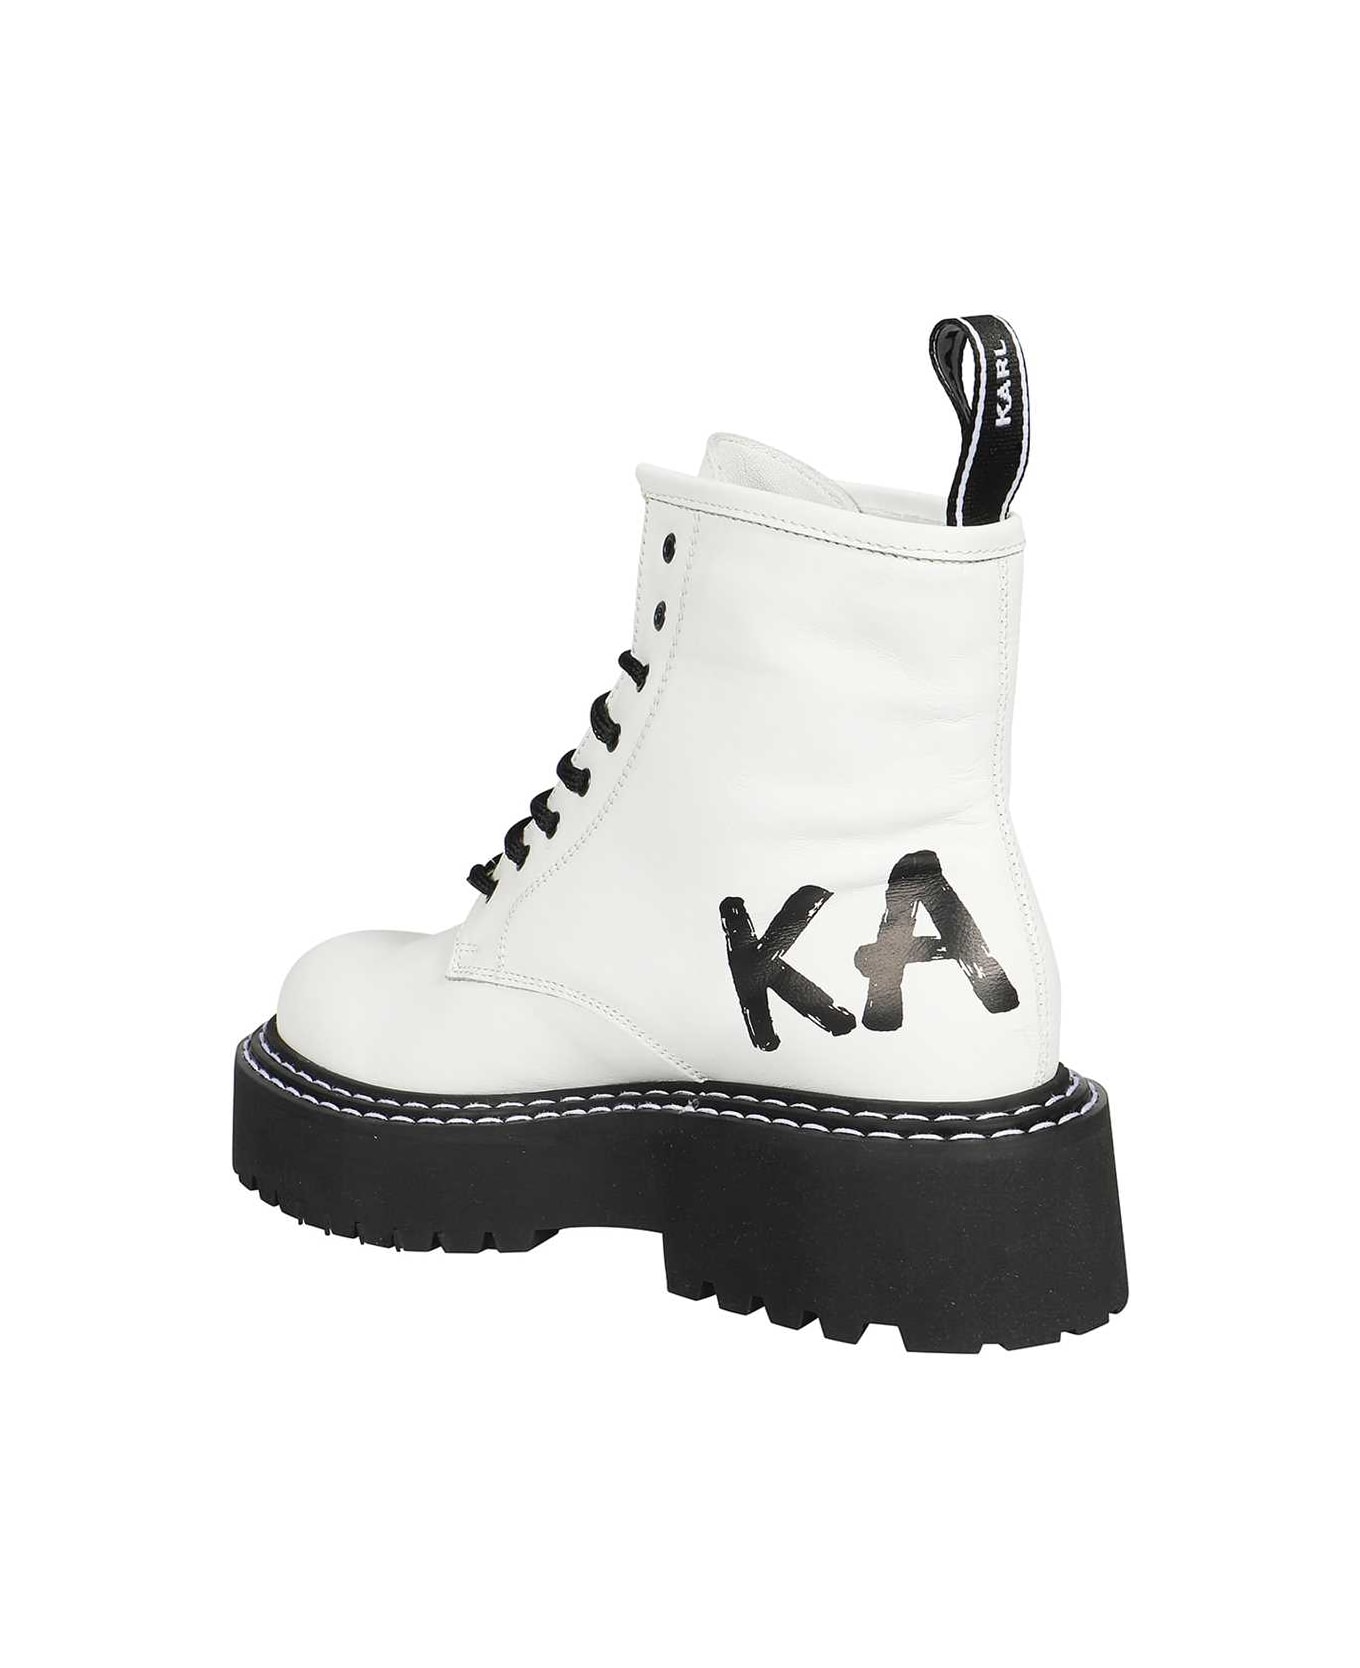 Karl Lagerfeld Lace-up Ankle Boots - White